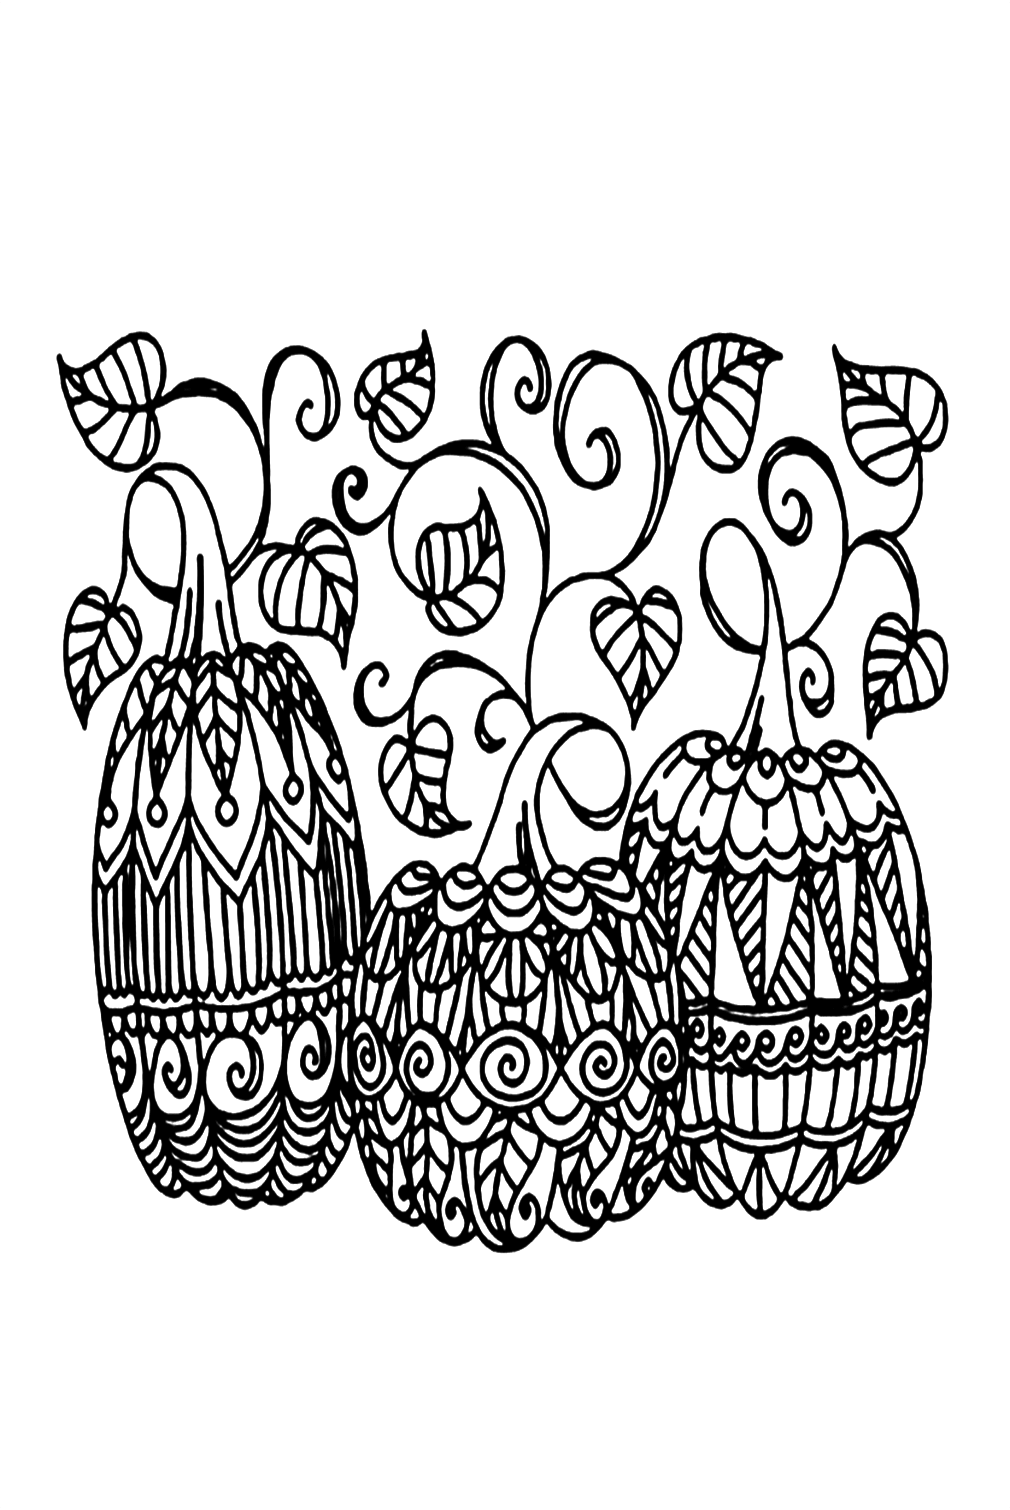 Three Halloween Pumpkins Coloring Pages